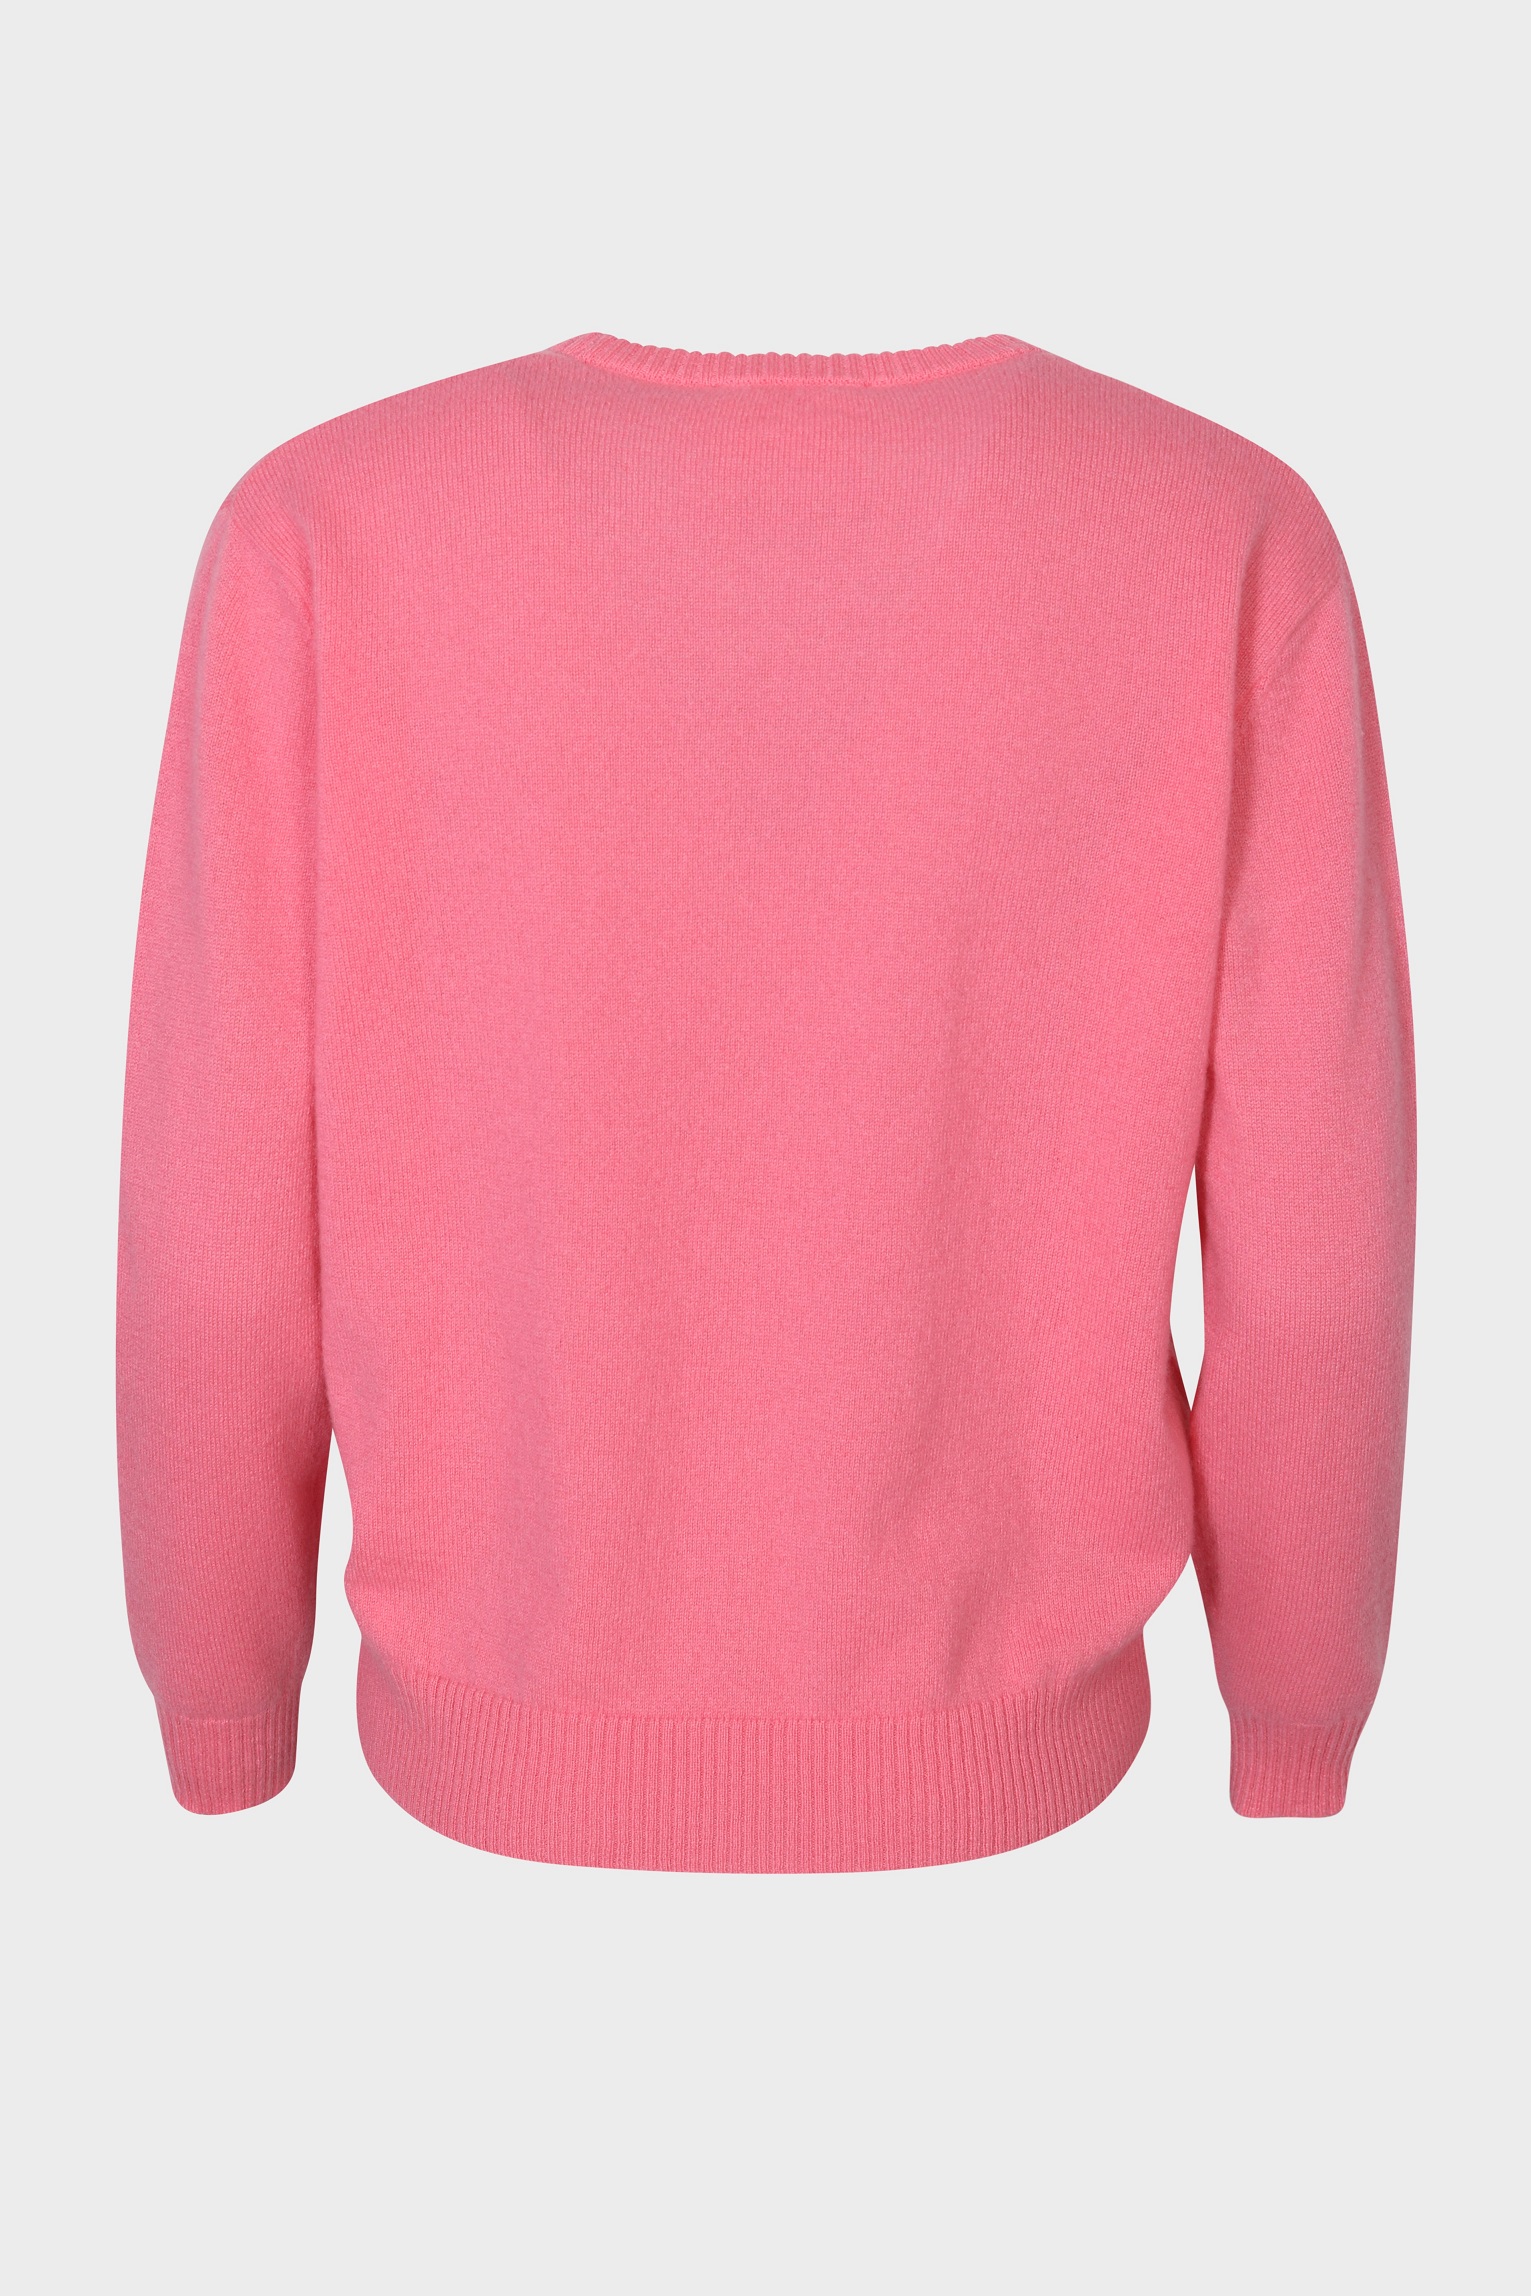 ABSOLUT CASHMERE Sweater Ysee Flamingo M